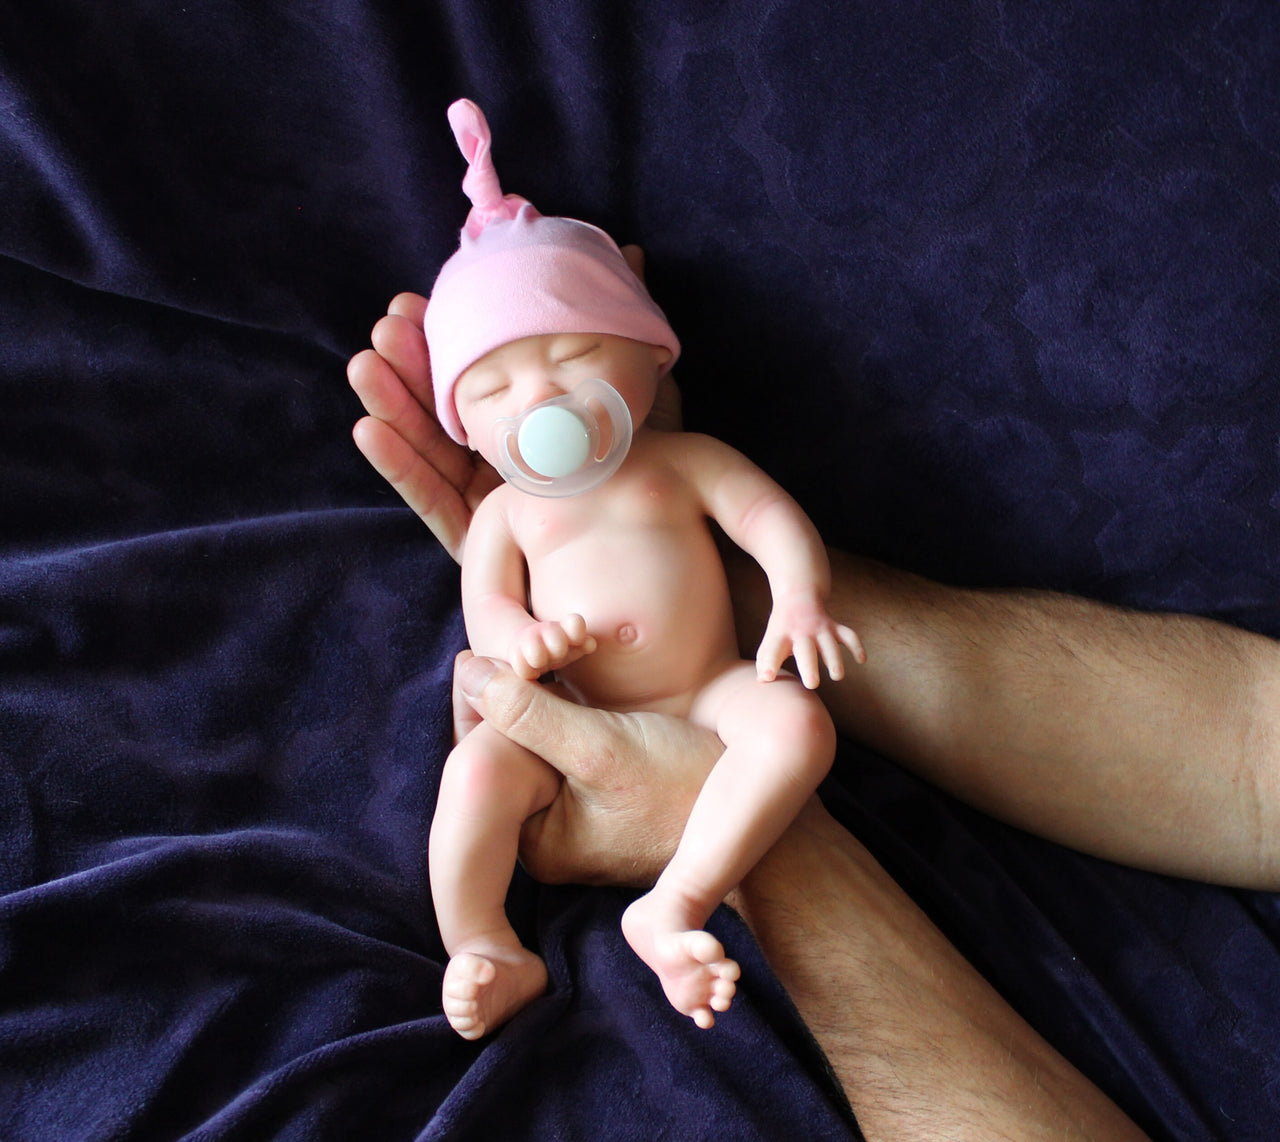 Drink and Wet Silicone Dolls Wet System Wets Diaper 13&quot; Full Silicone Baby Doll Can Pee Diapers Realistic Real Lifelike 3lbs Dolls Bathtub